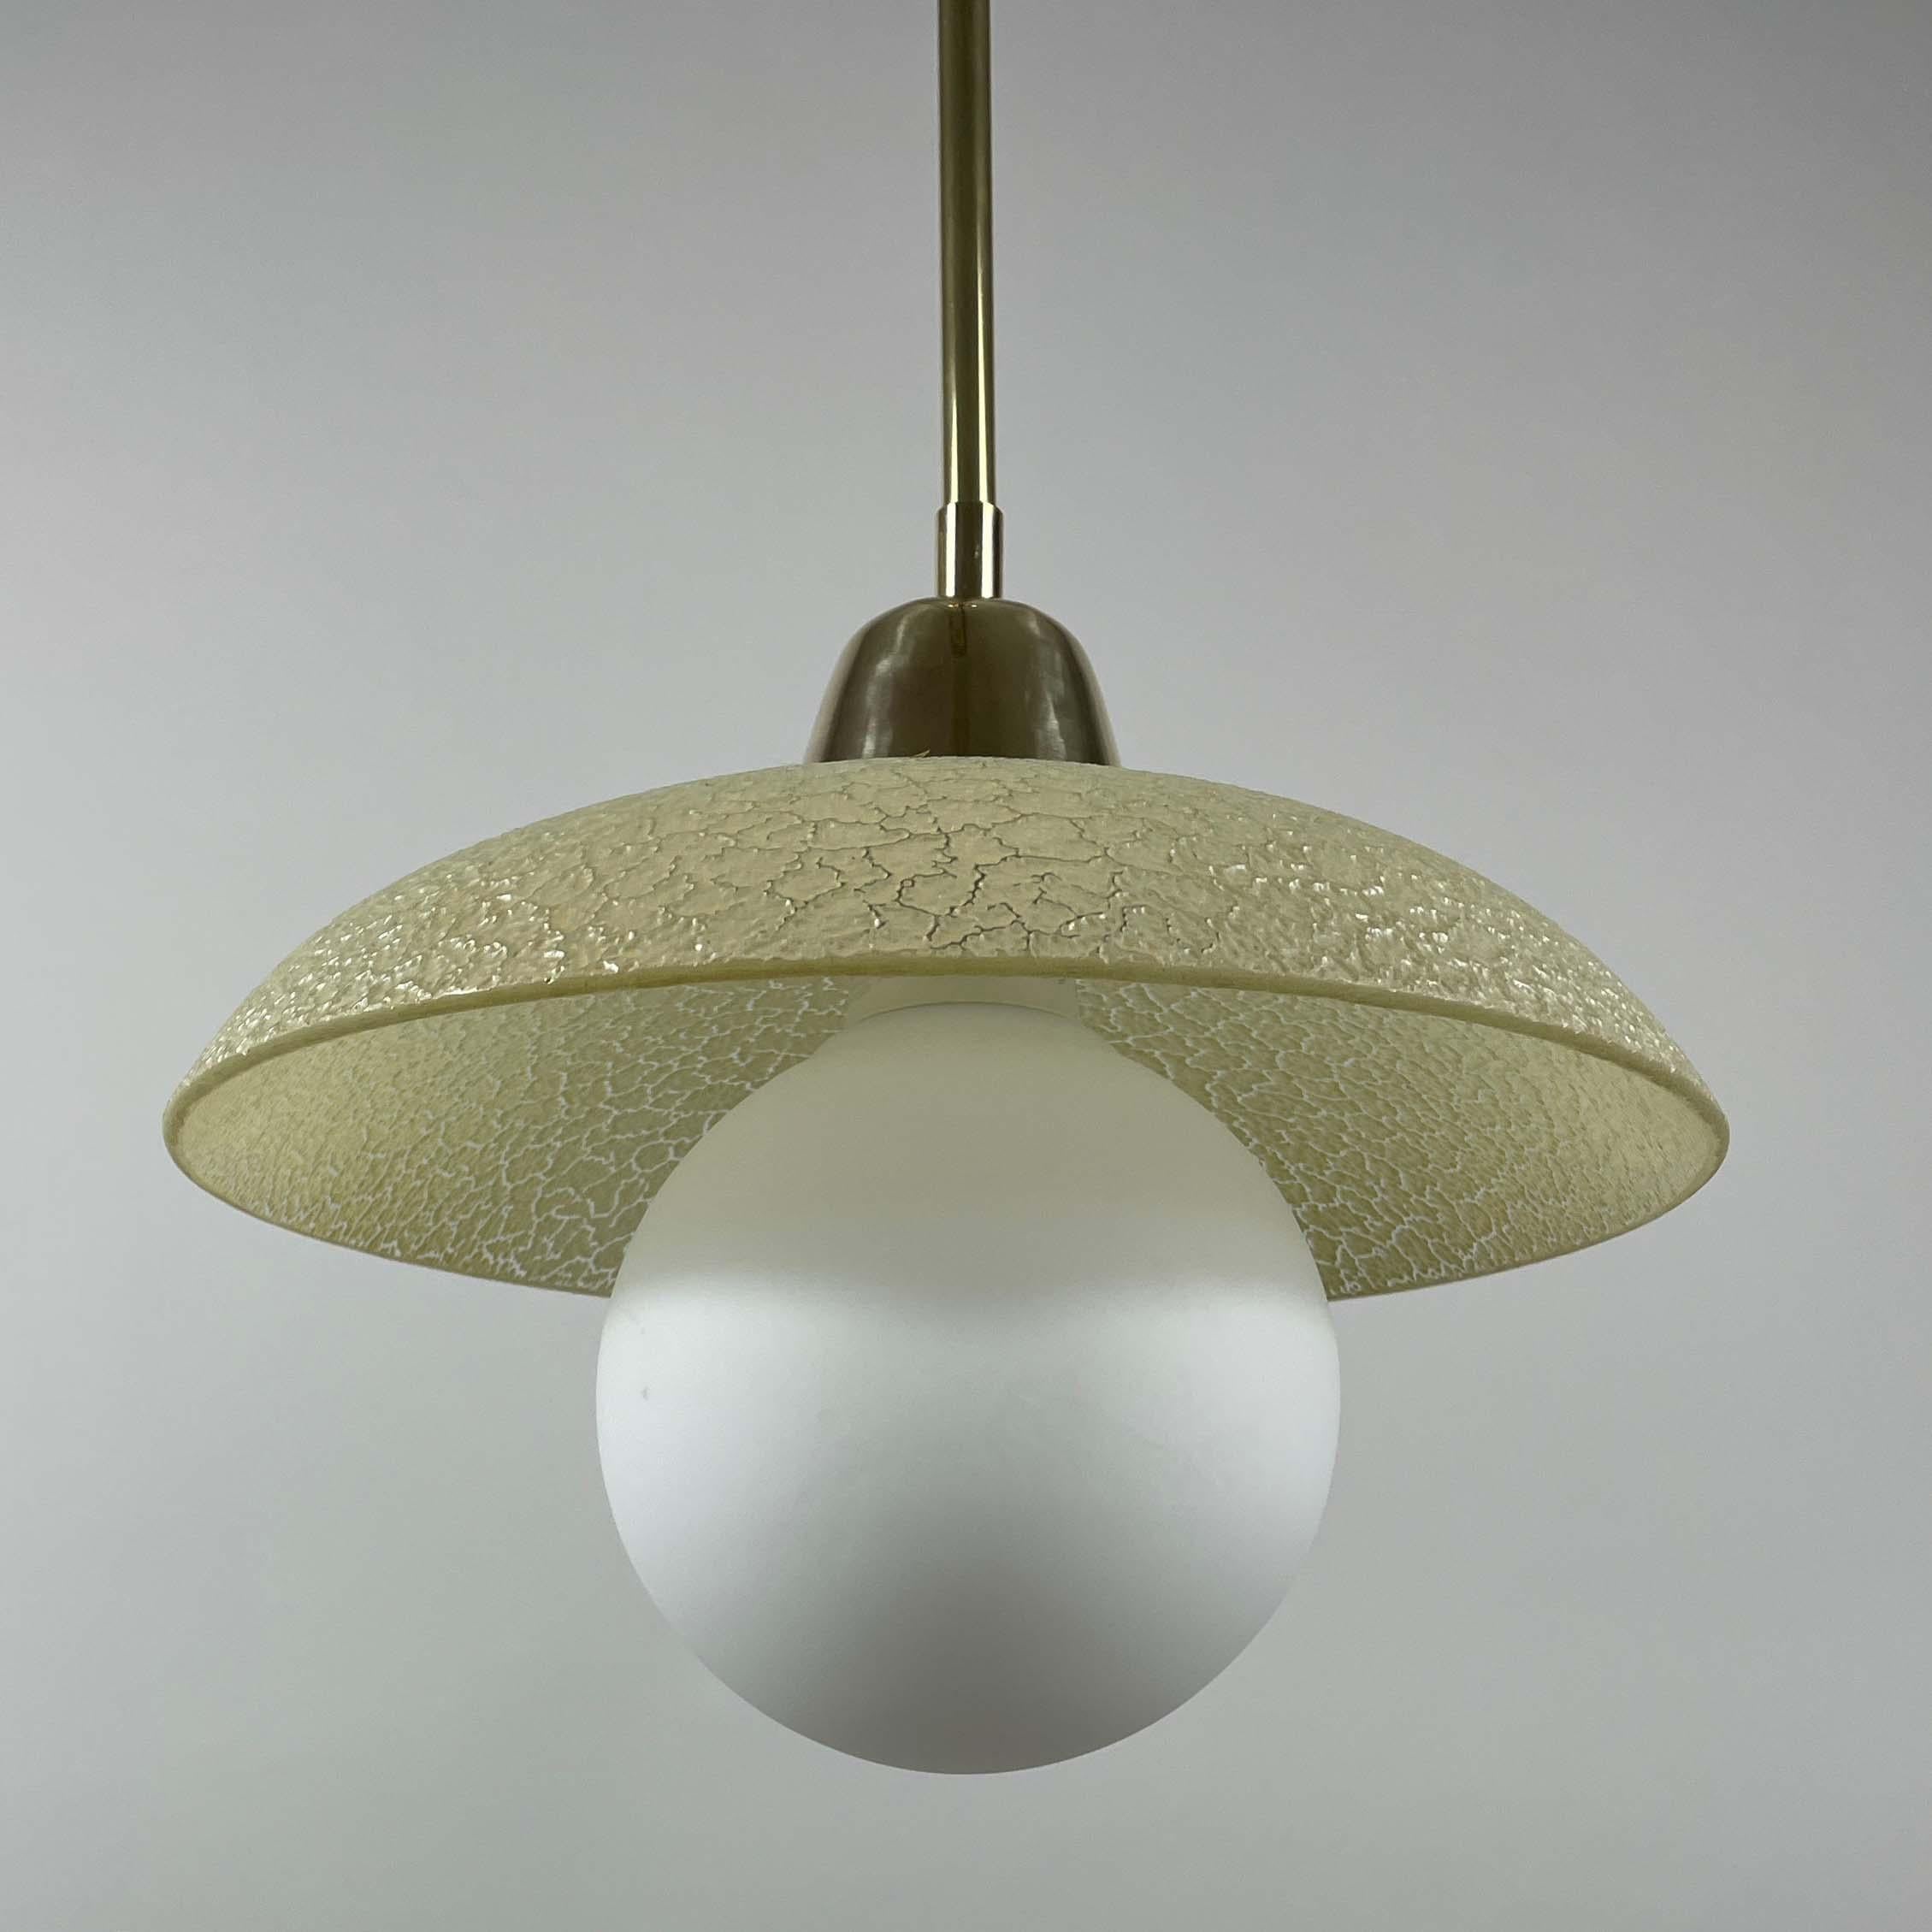 Cream Textured Glass and Brass Pendants, Sweden 1940s to 1950s For Sale 2